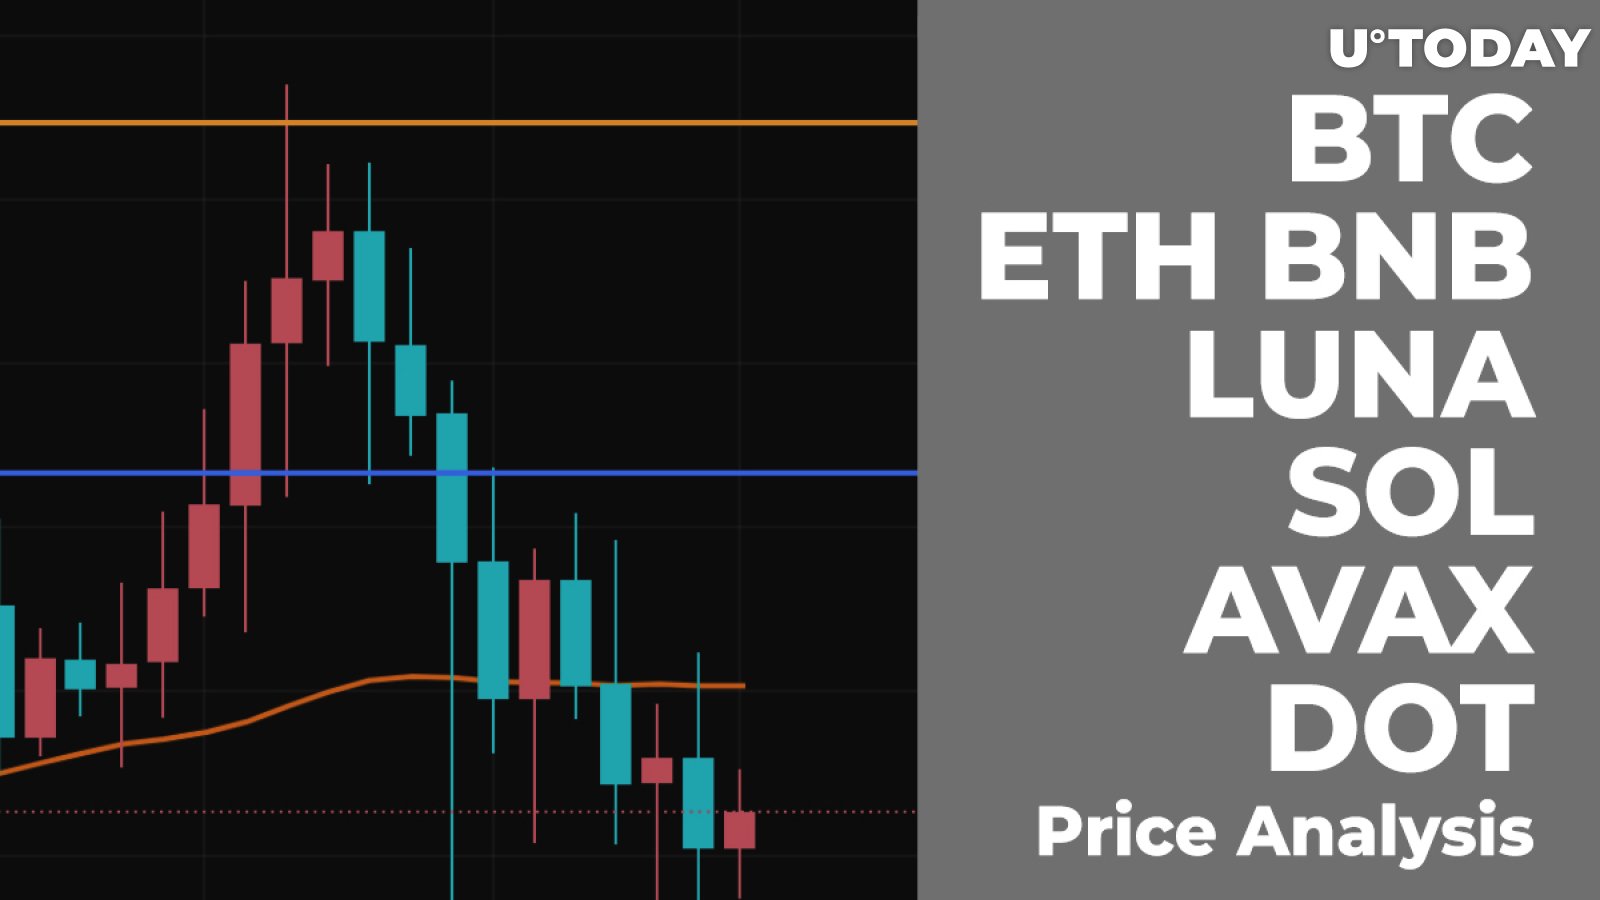 BTC, ETH, BNB, LUNA, SOL, AVAX and DOT Price Analysis for February 10